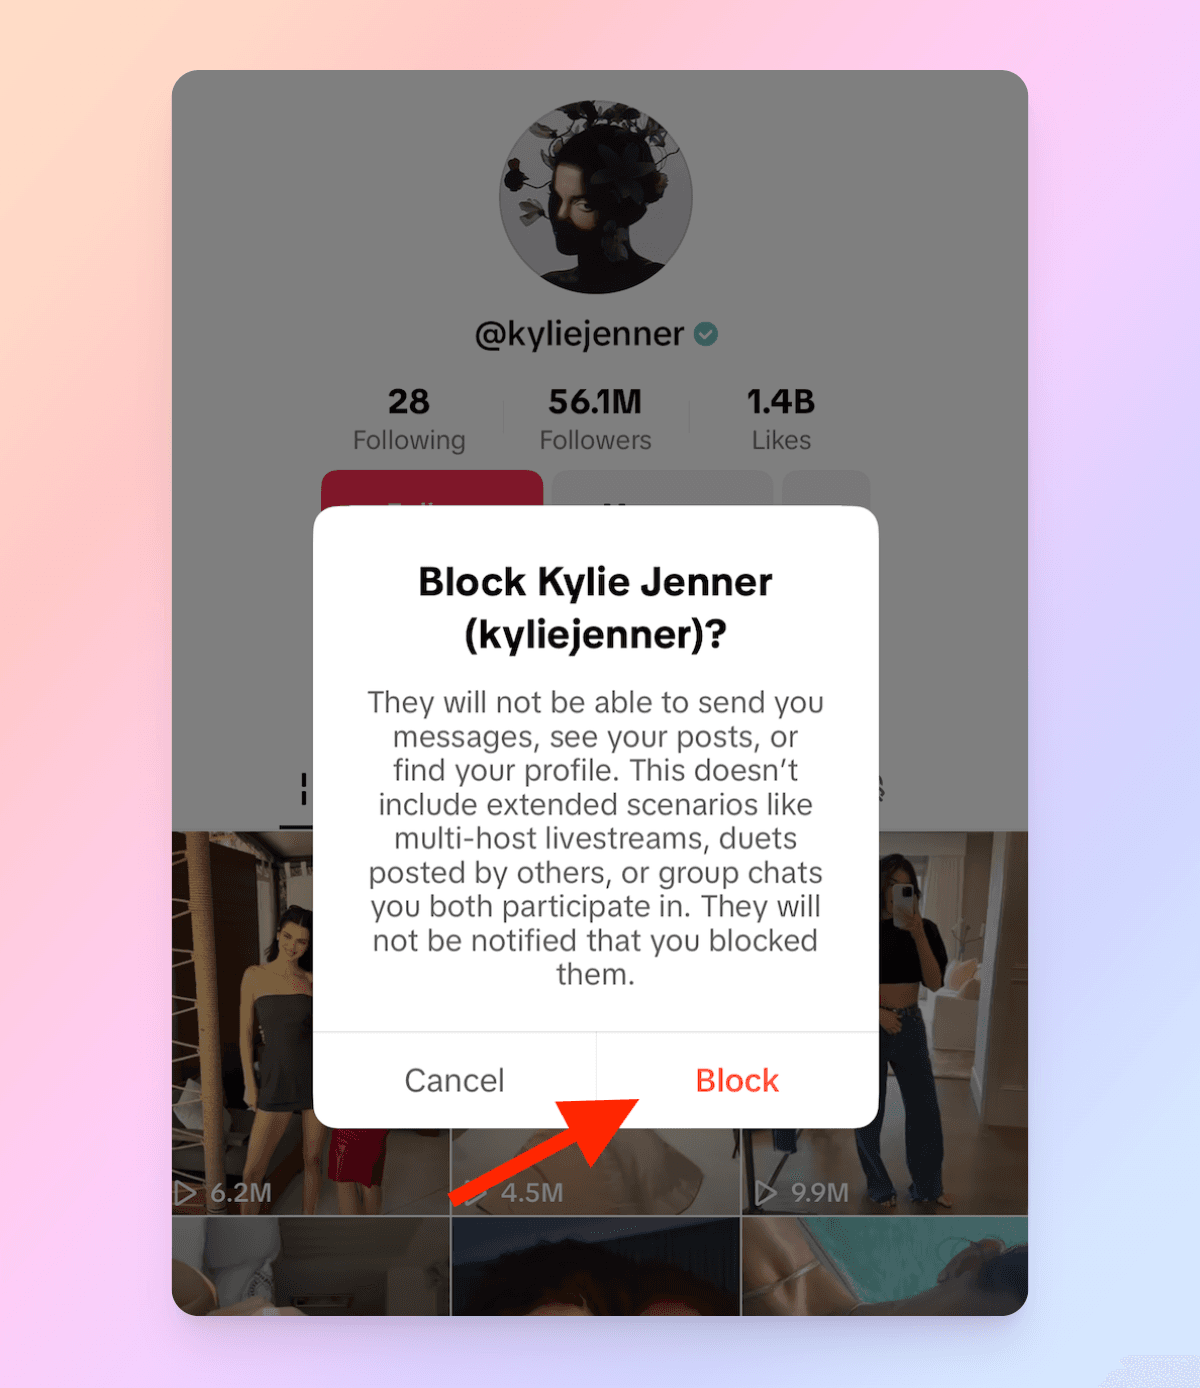 Confirm the Block image